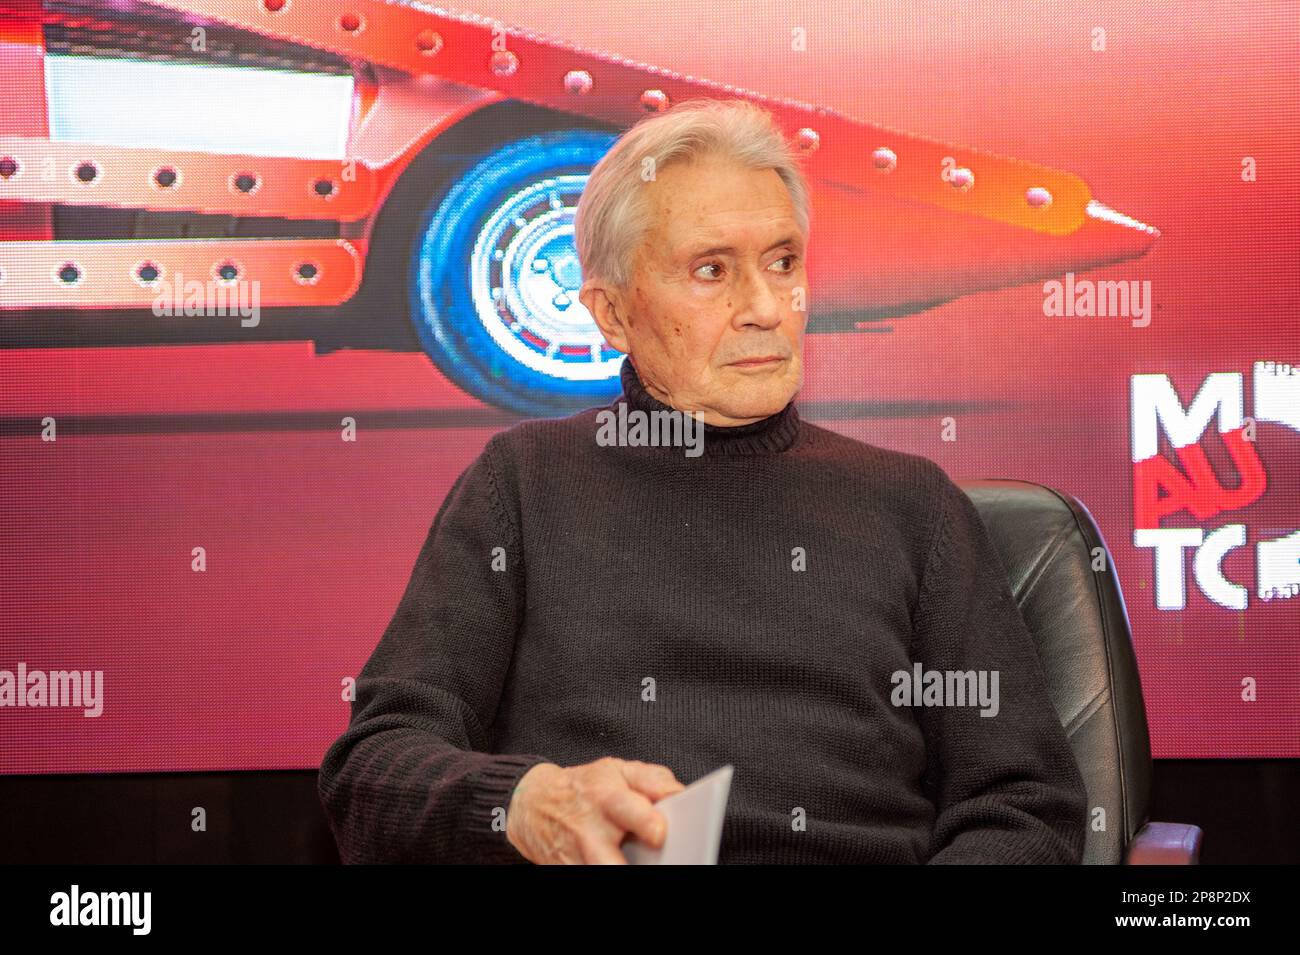 01/23/2019 Turin (Italy) Marcello Gandini at the Turin Automobile Museum on the occasion of the presentation of the exhibition dedicated to him Stock Photo